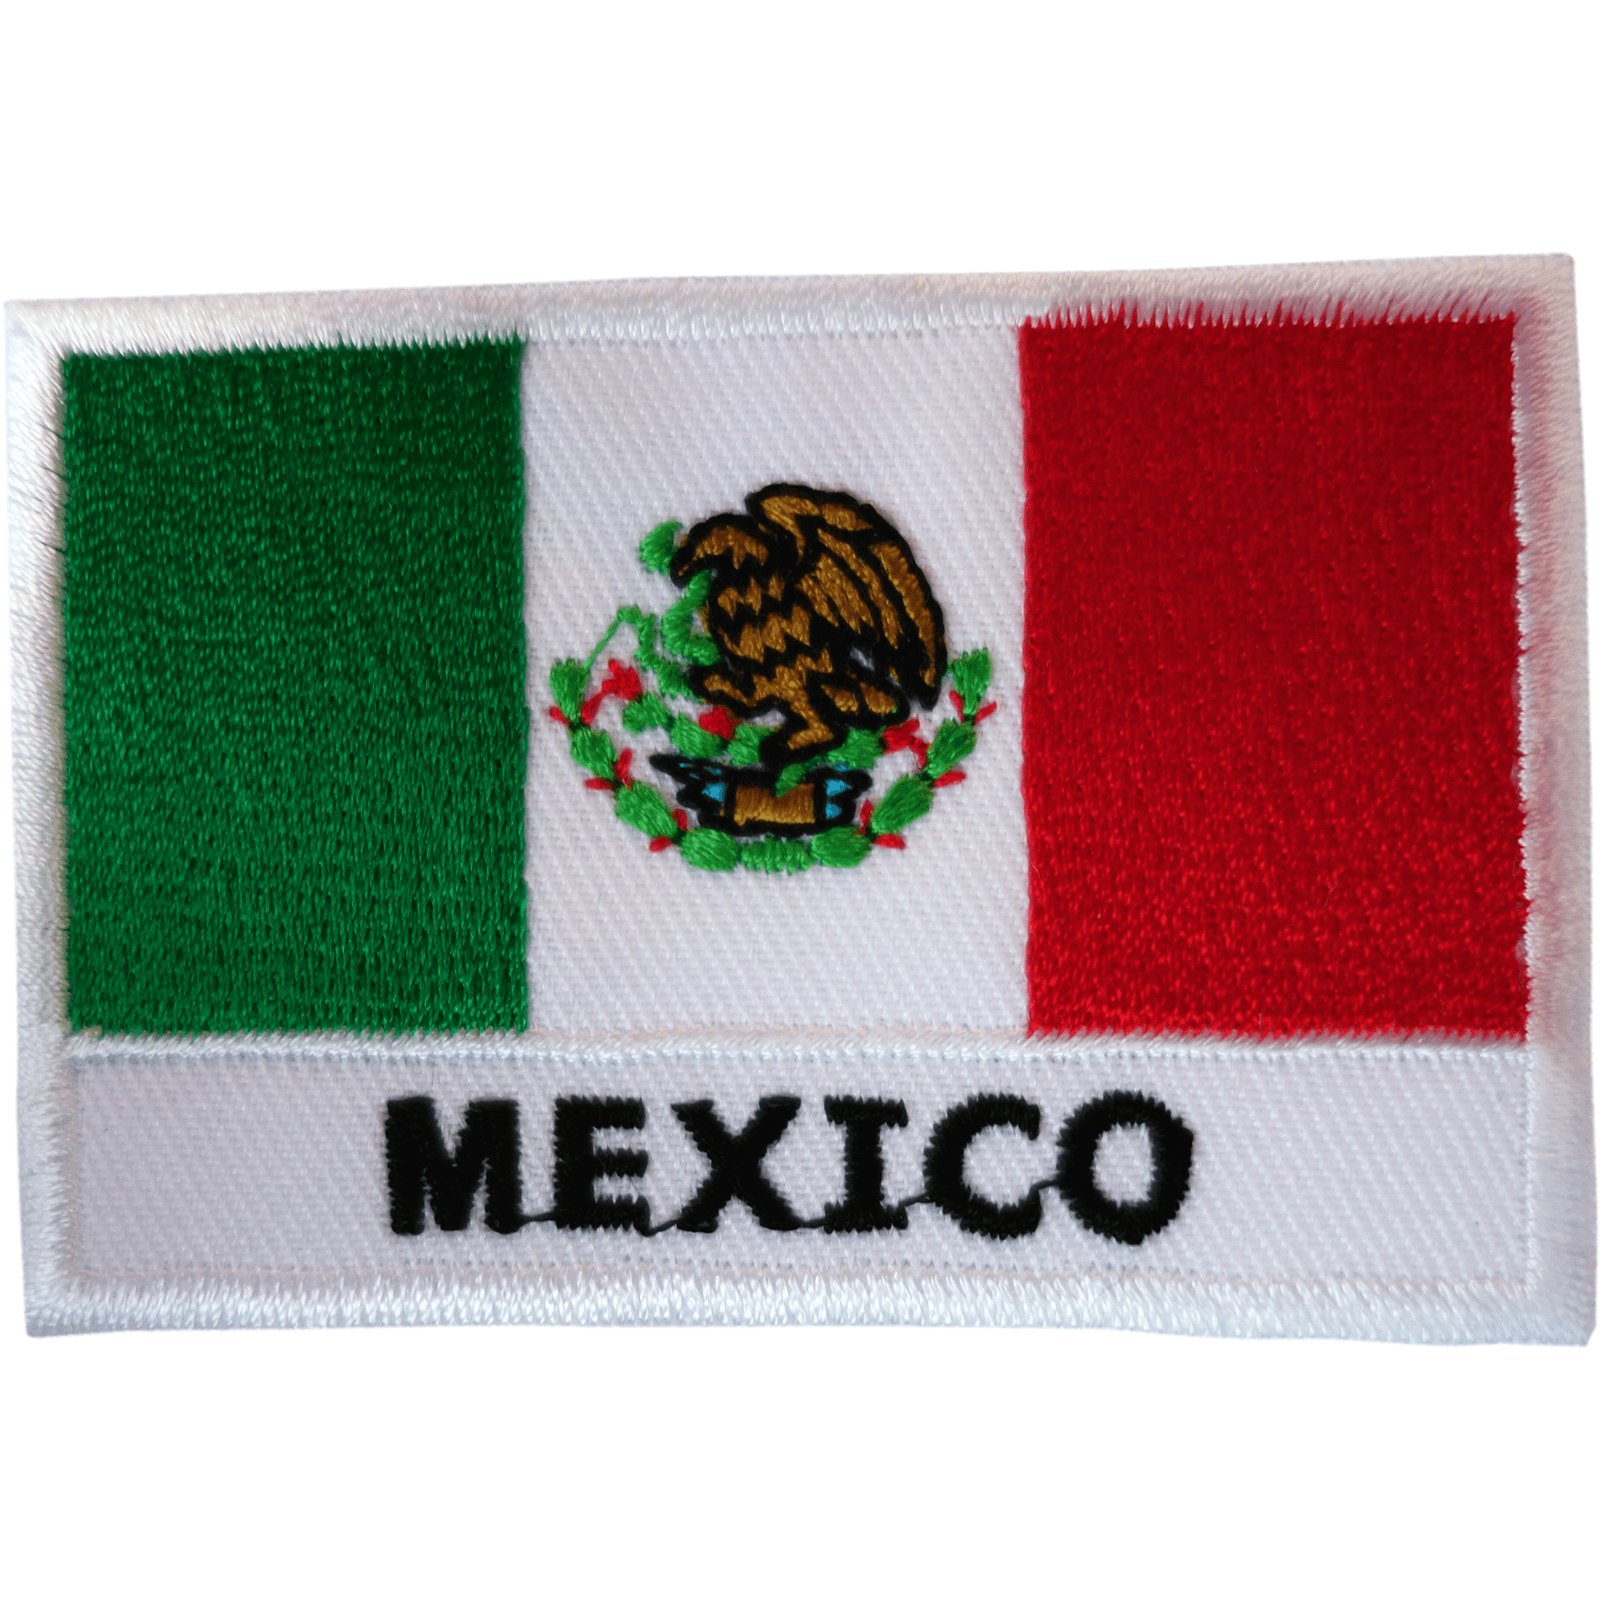 High Quality Discount Shield Mexico Flag Embroidered Cloth Sew on Iron on  Mexico Emblem Shield Patches with Golden Yellow Border